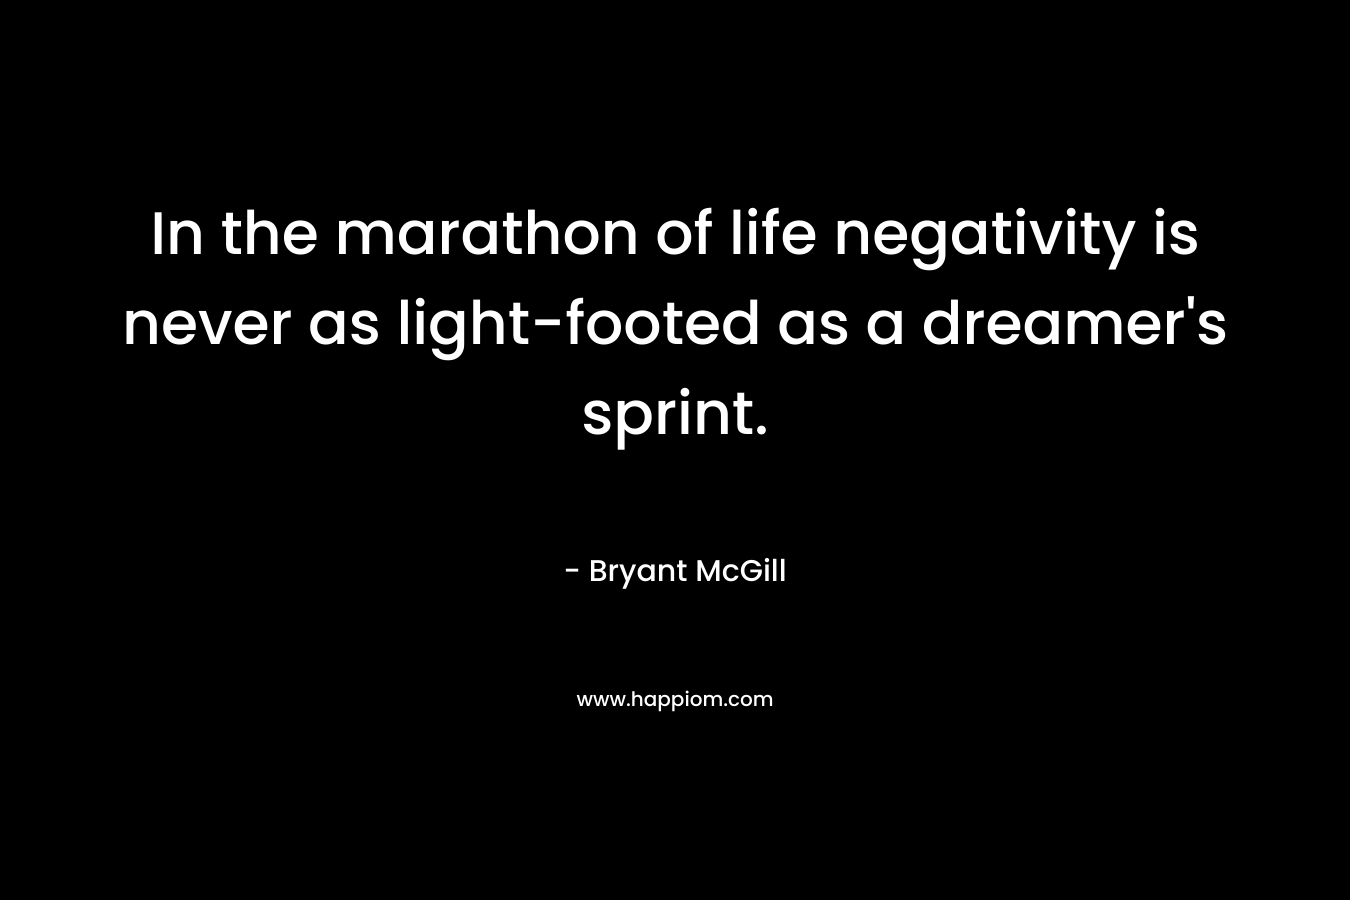 In the marathon of life negativity is never as light-footed as a dreamer’s sprint. – Bryant McGill